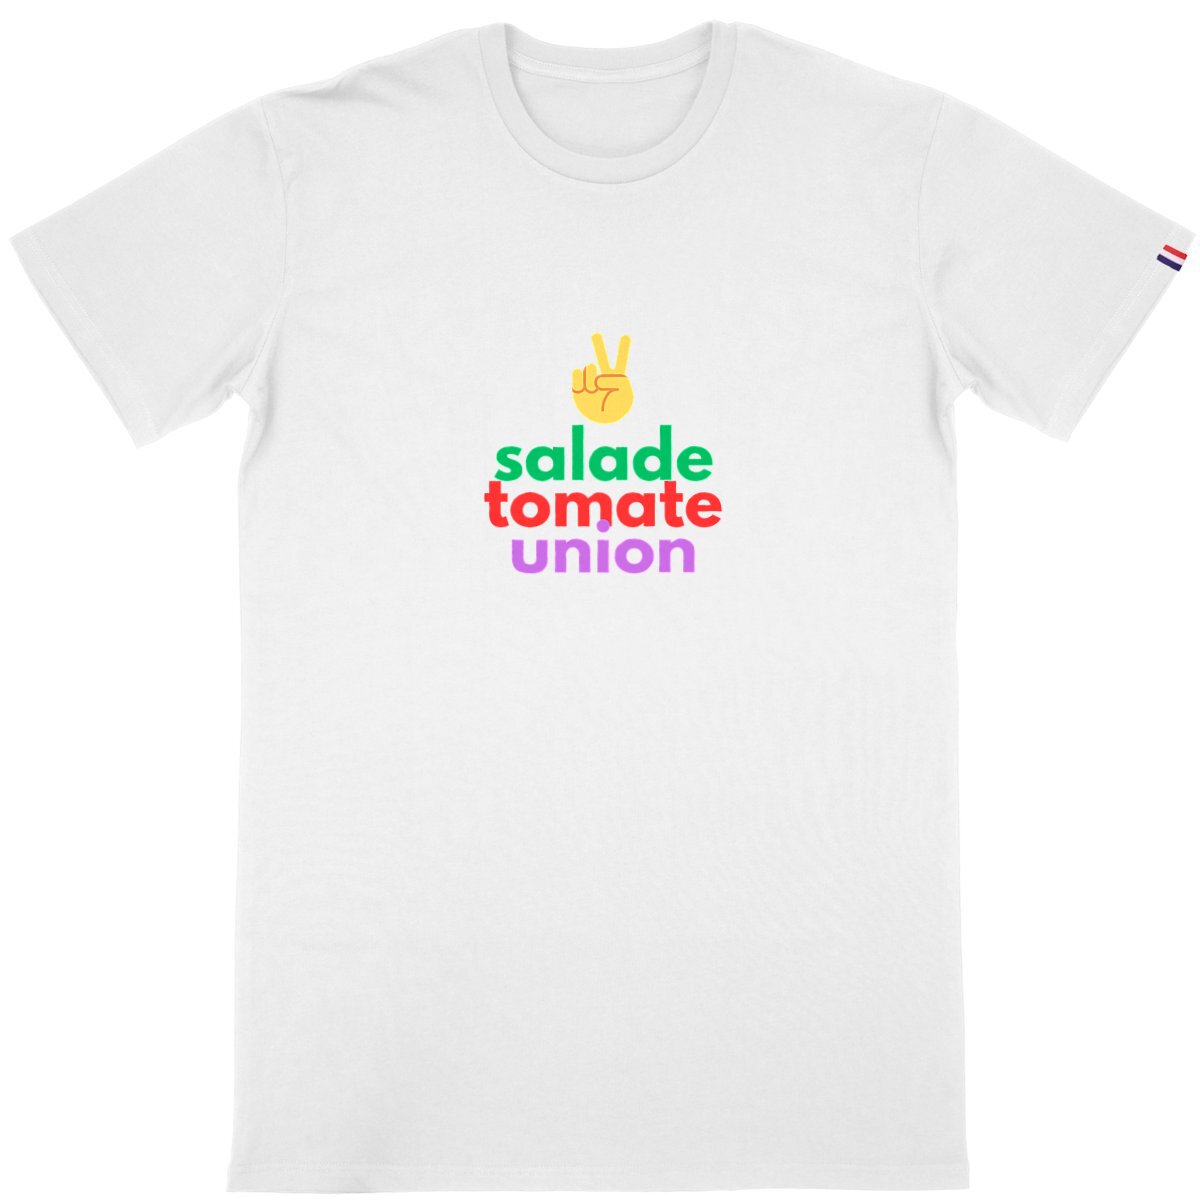 T-shirt Homme Made in France 100% Coton Bio Salade Tomate Union